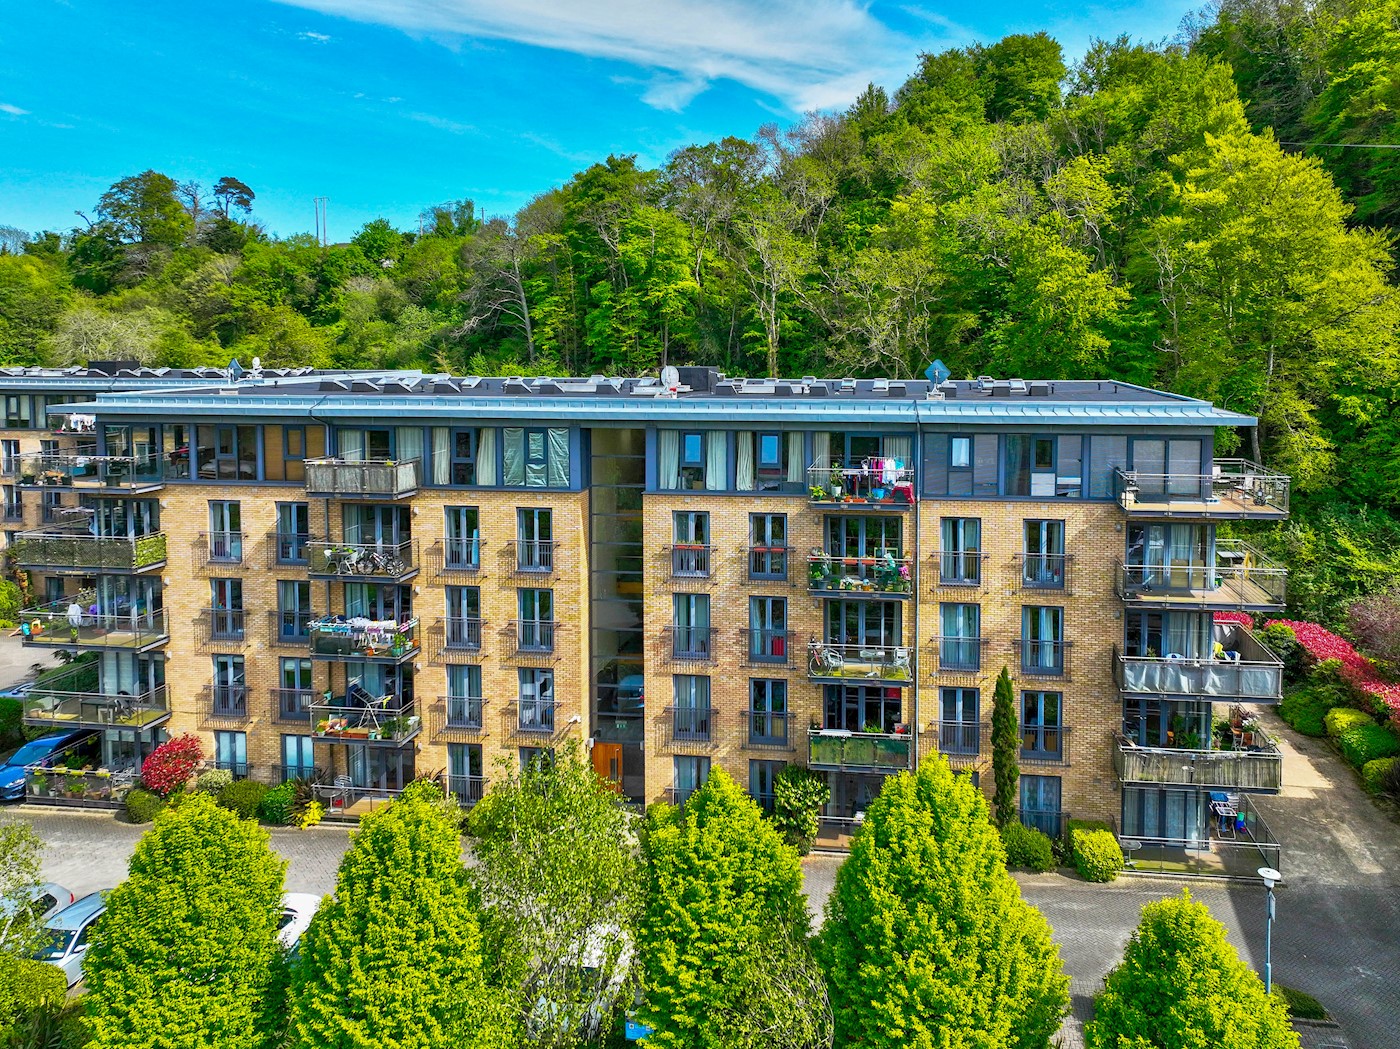 Apartment 75, Riversdale, Bray, Co. Wicklow, A98 ET02 1/15